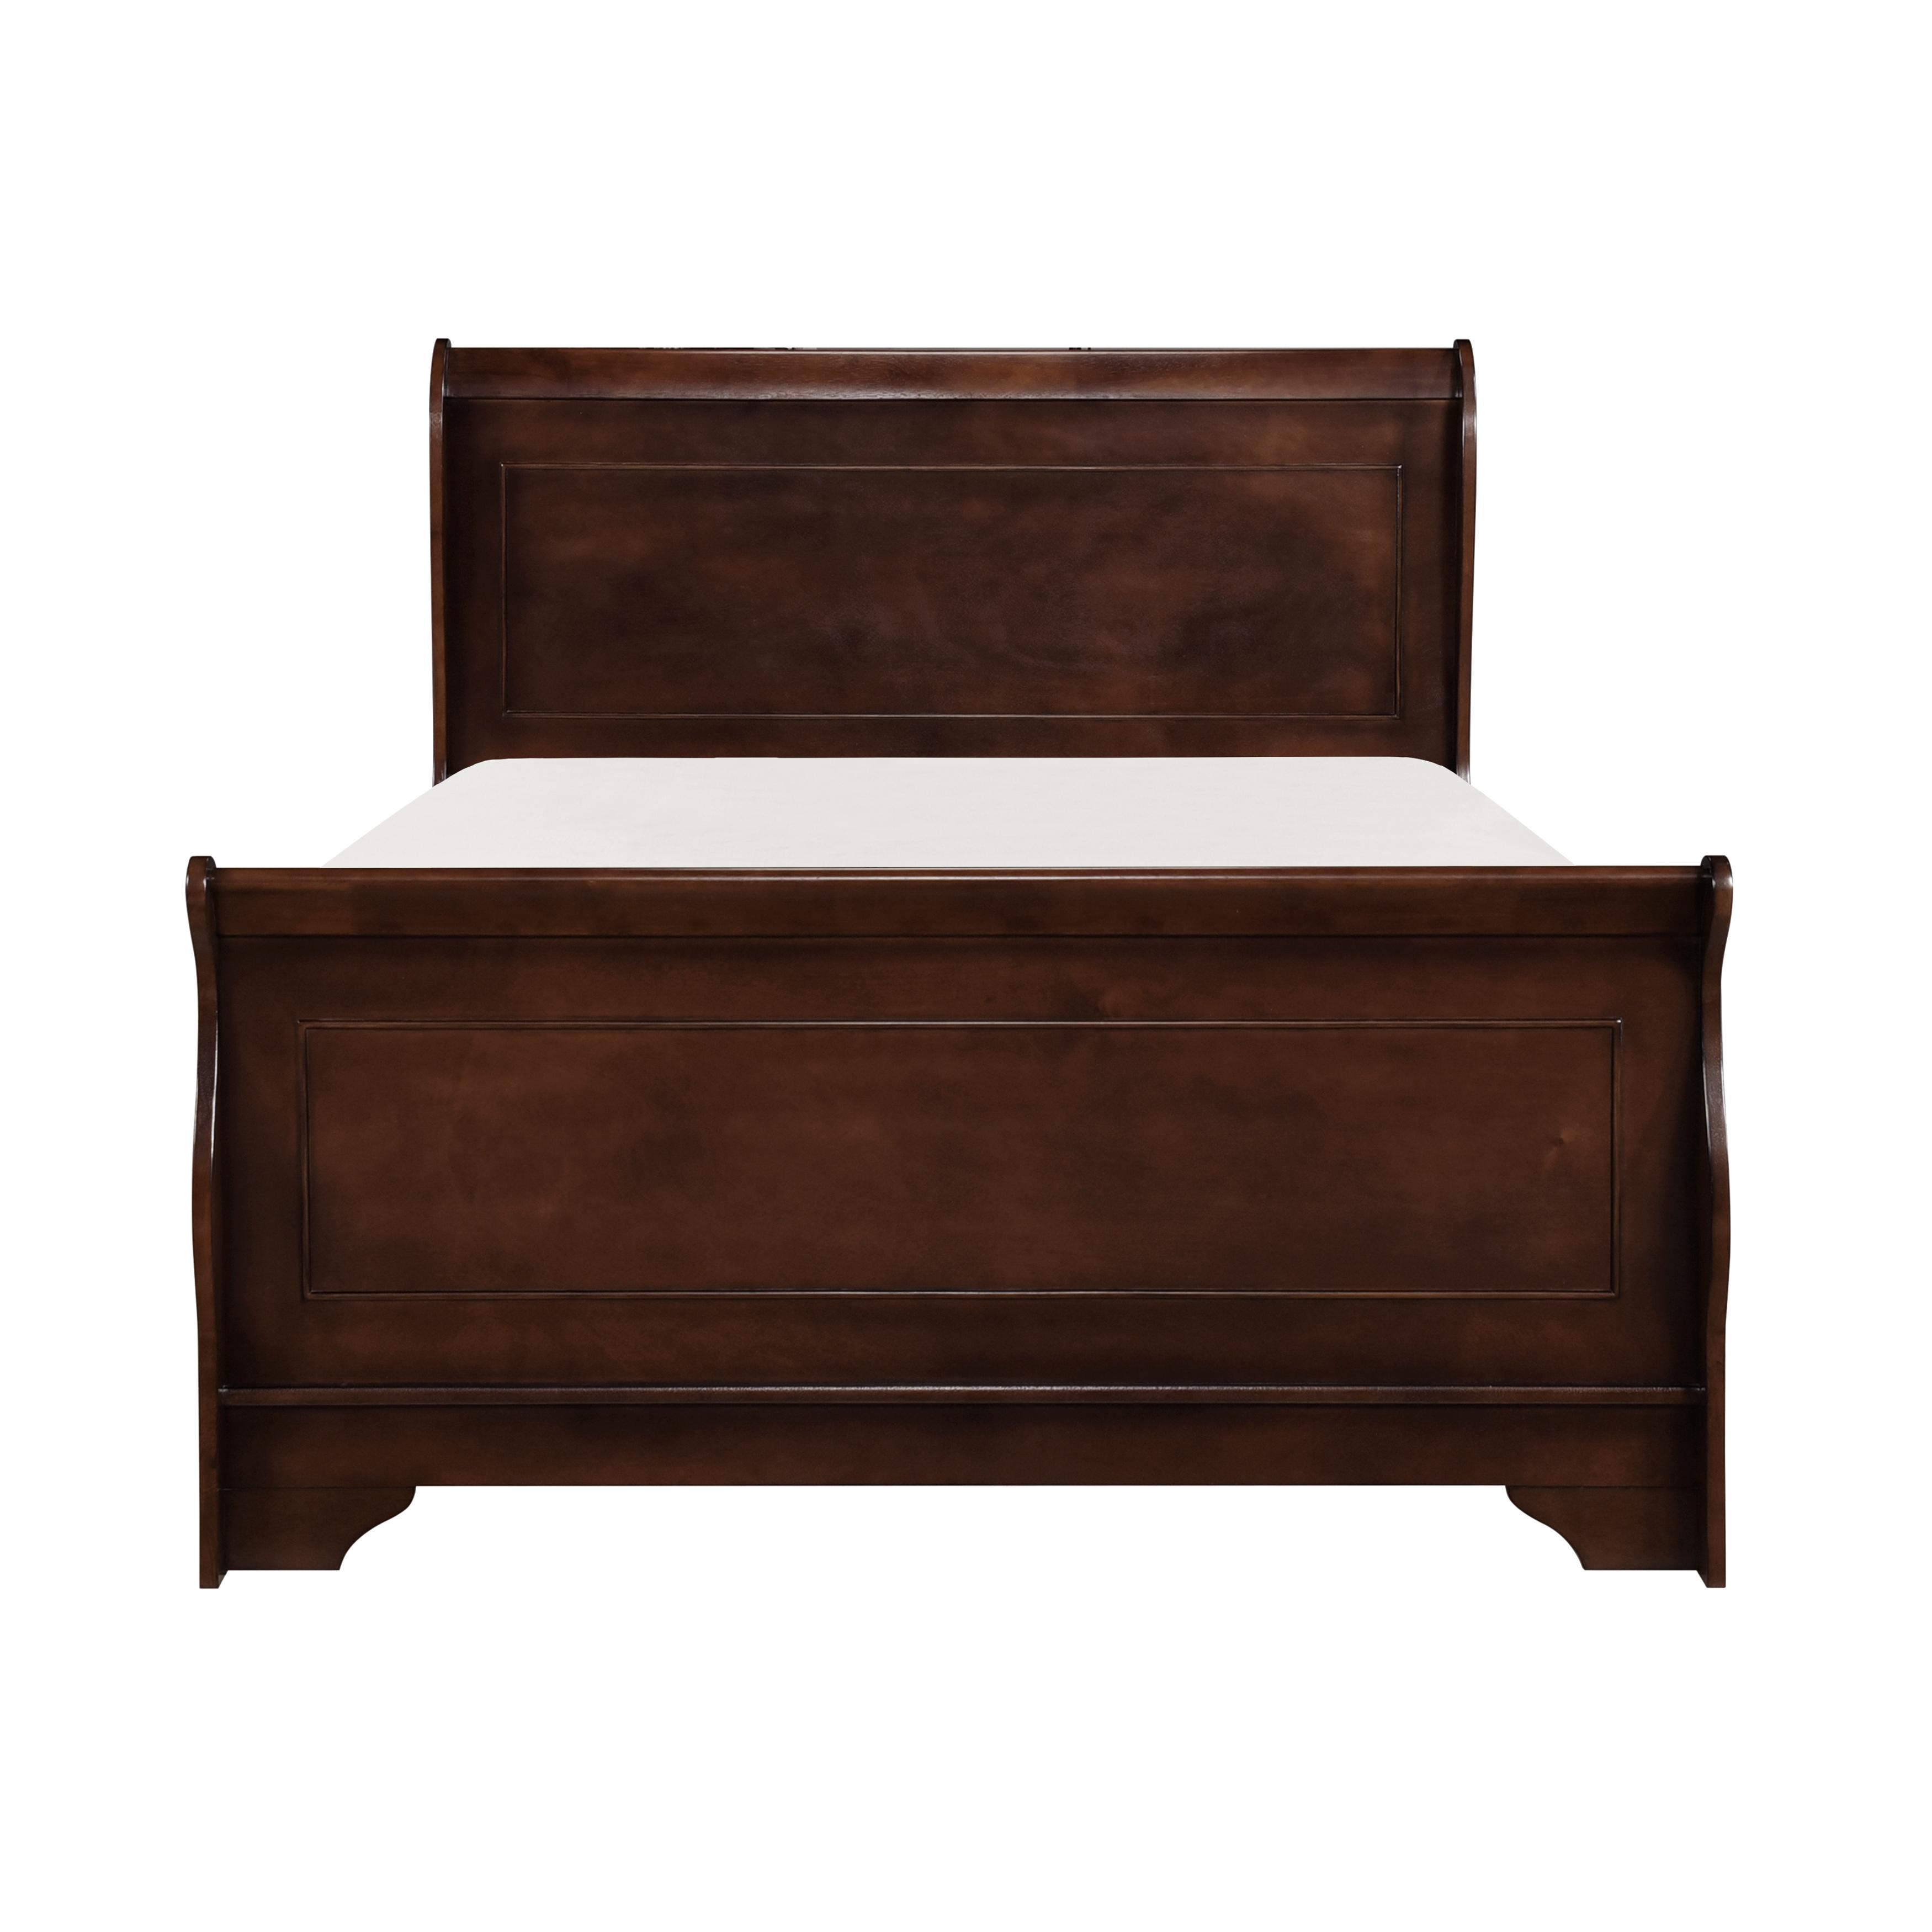 

    
Glam Brown Cherry Wood Queen Bed Homelegance 1856-1* Abbeville
